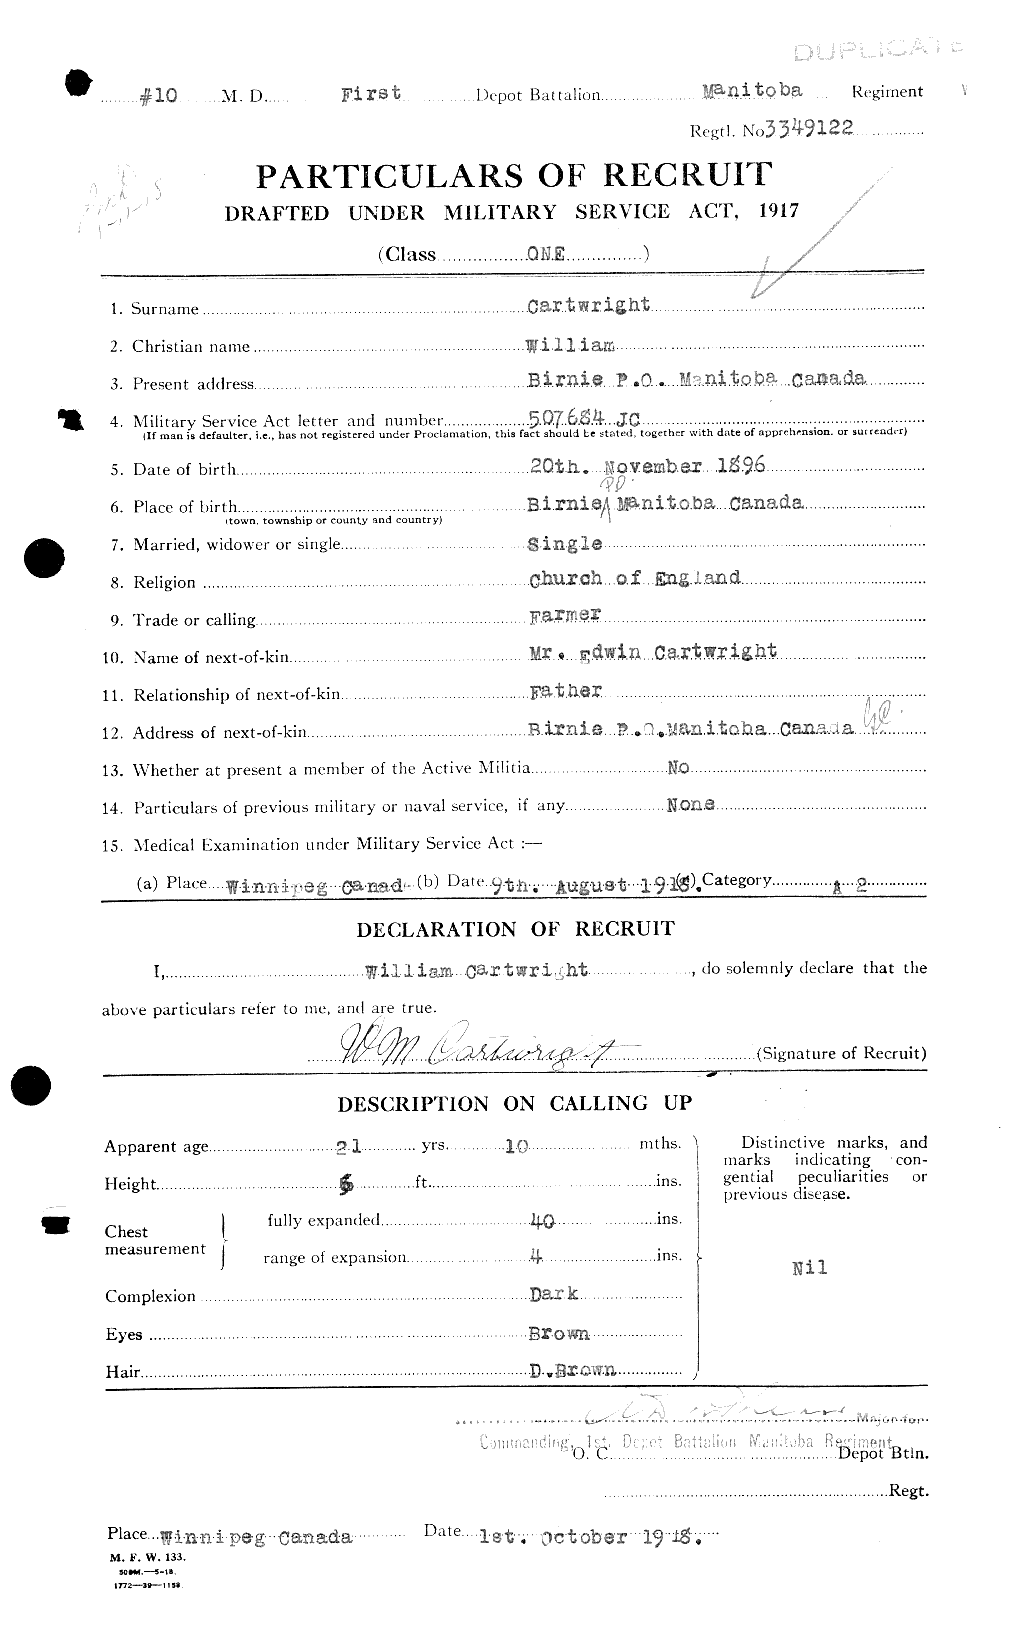 Personnel Records of the First World War - CEF 011639a